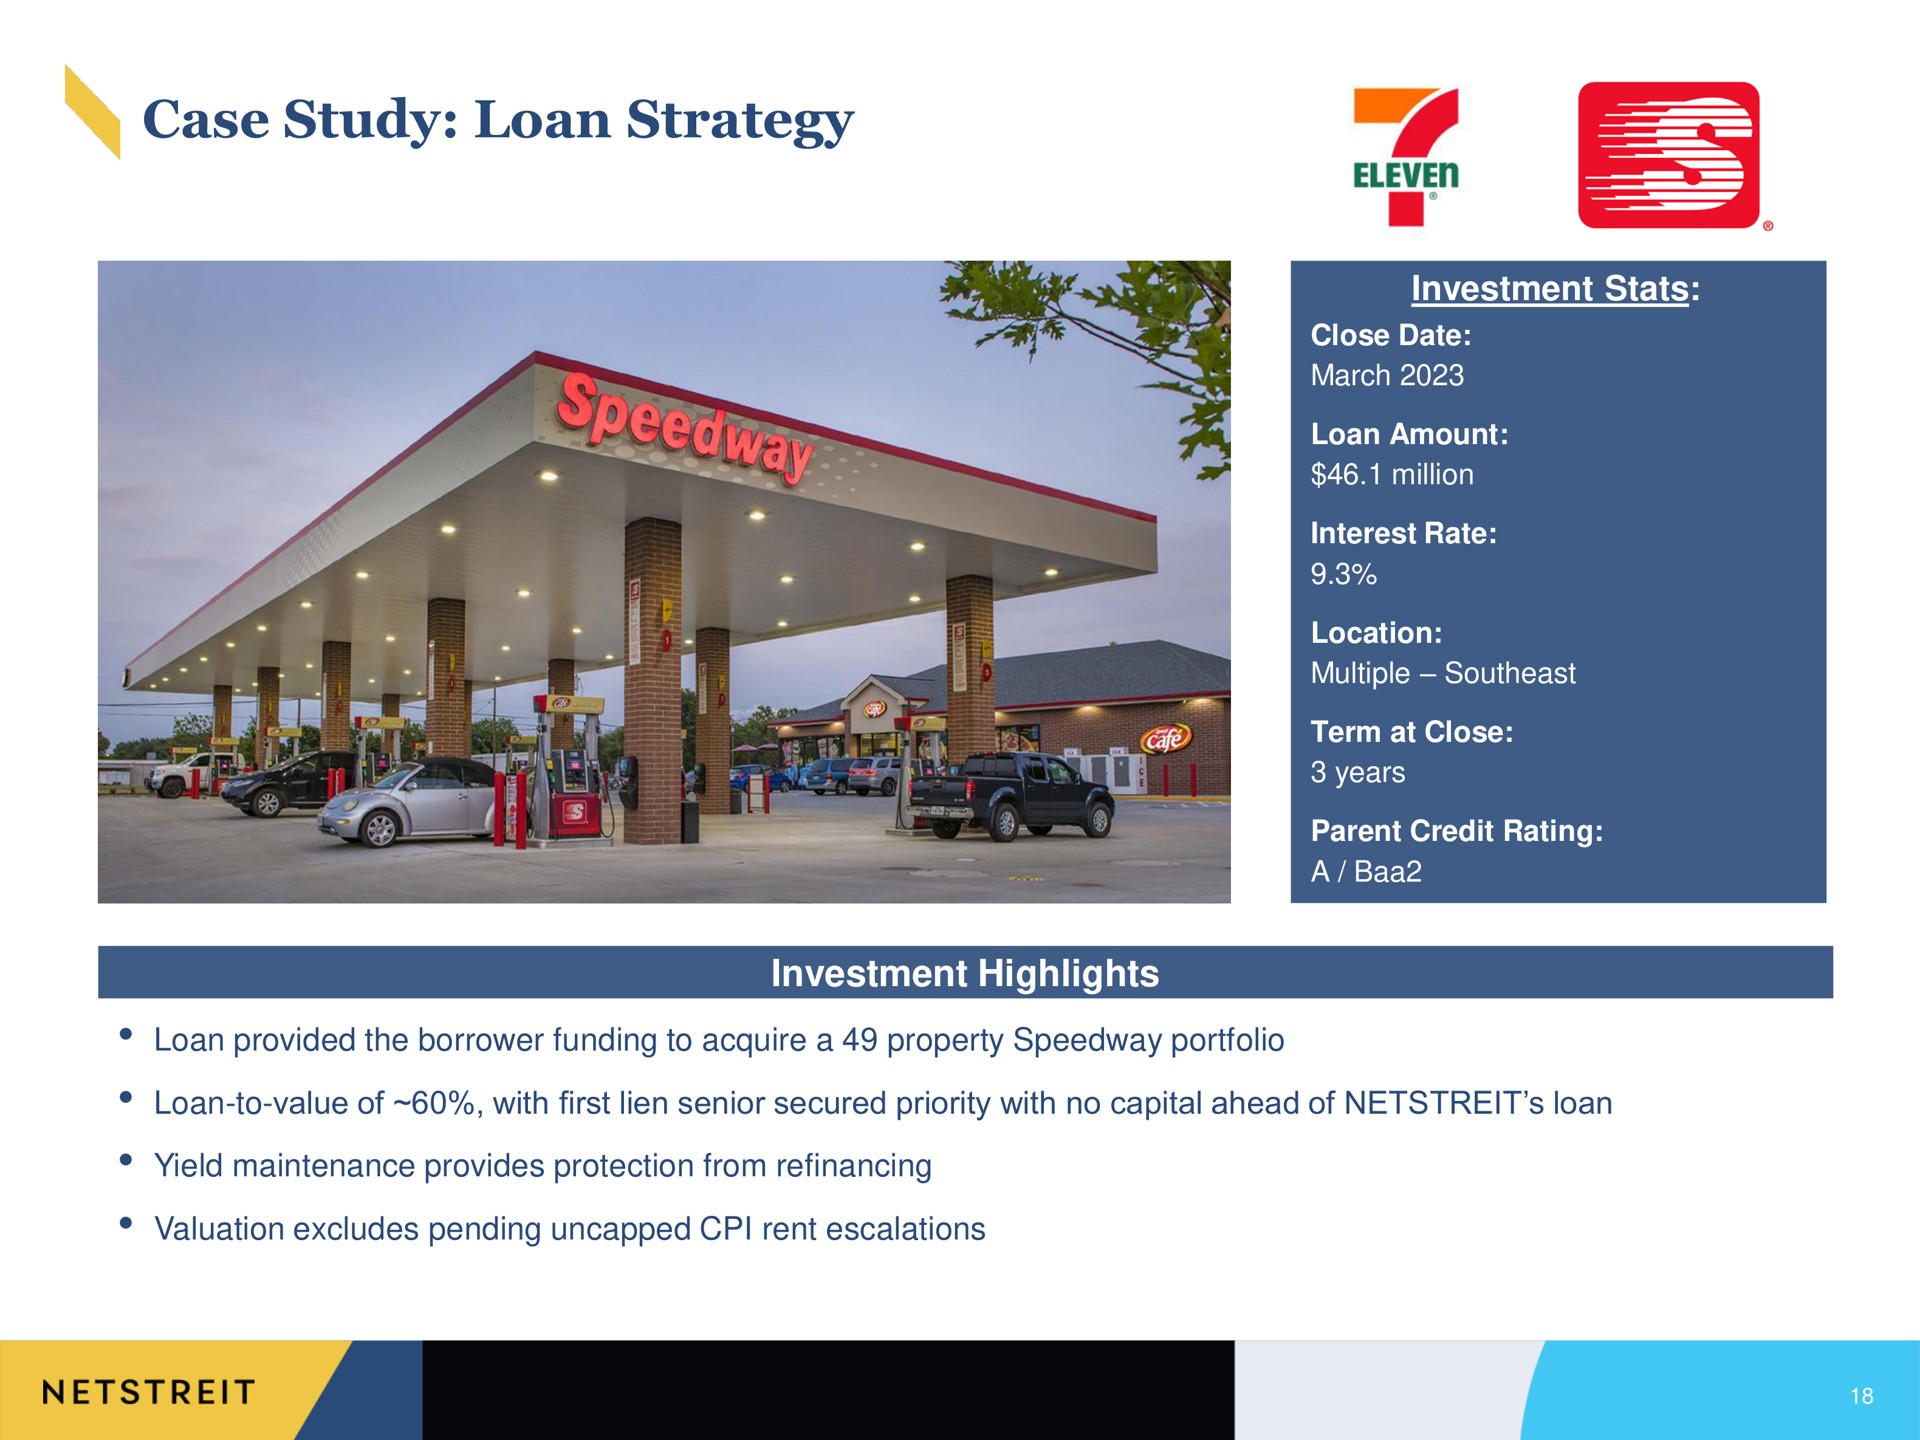 case study loan strategy investment investment highlights | Netstreit